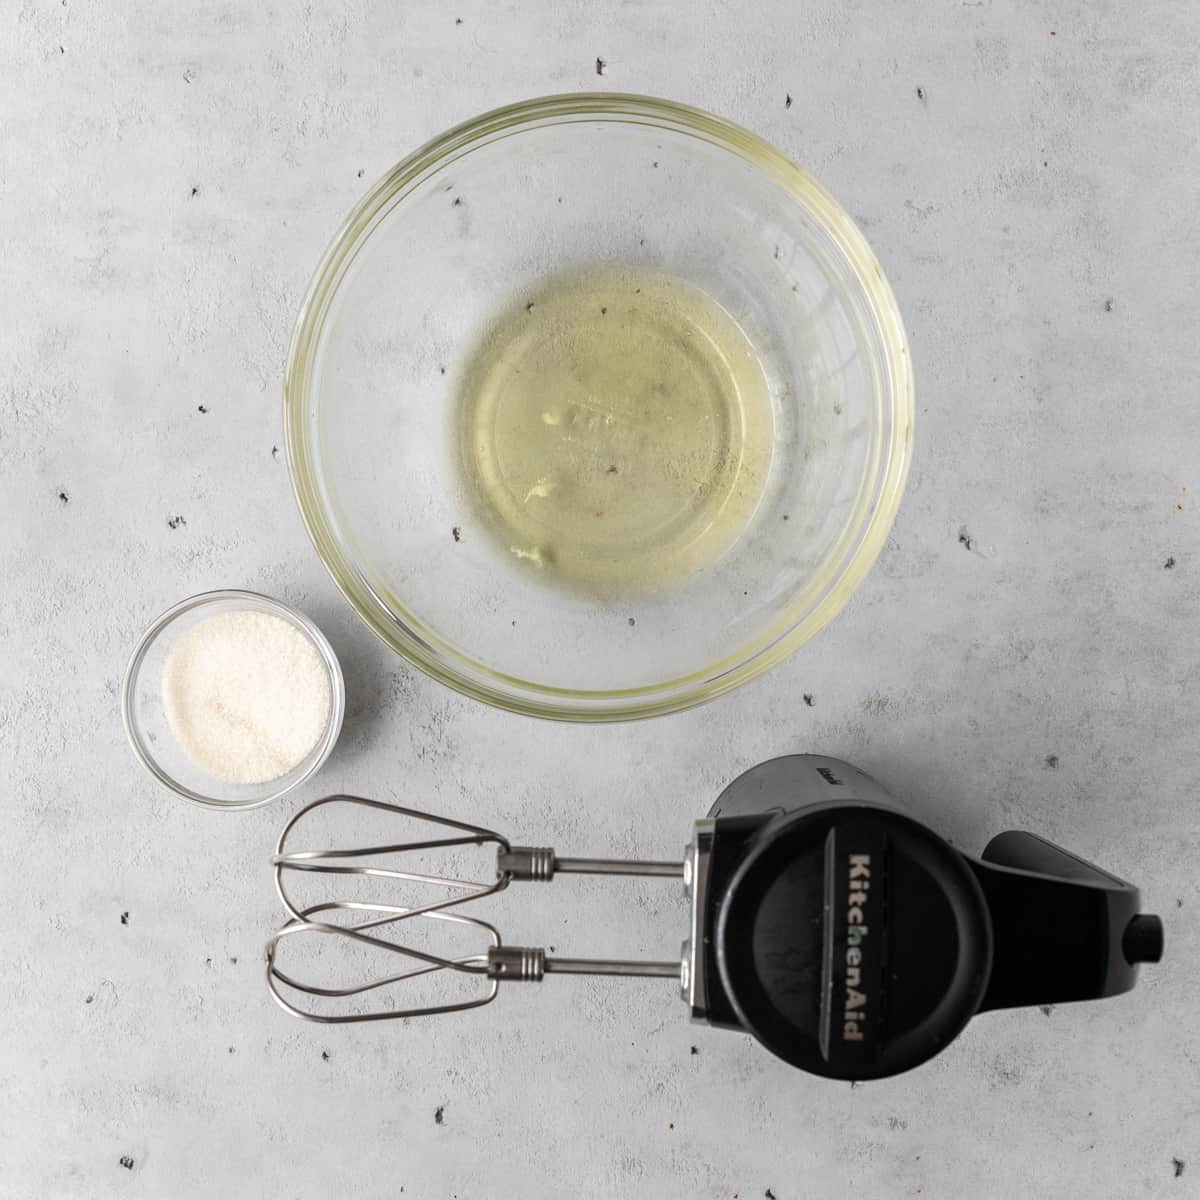 the egg whites, sugar, and hand mixer on a grey background